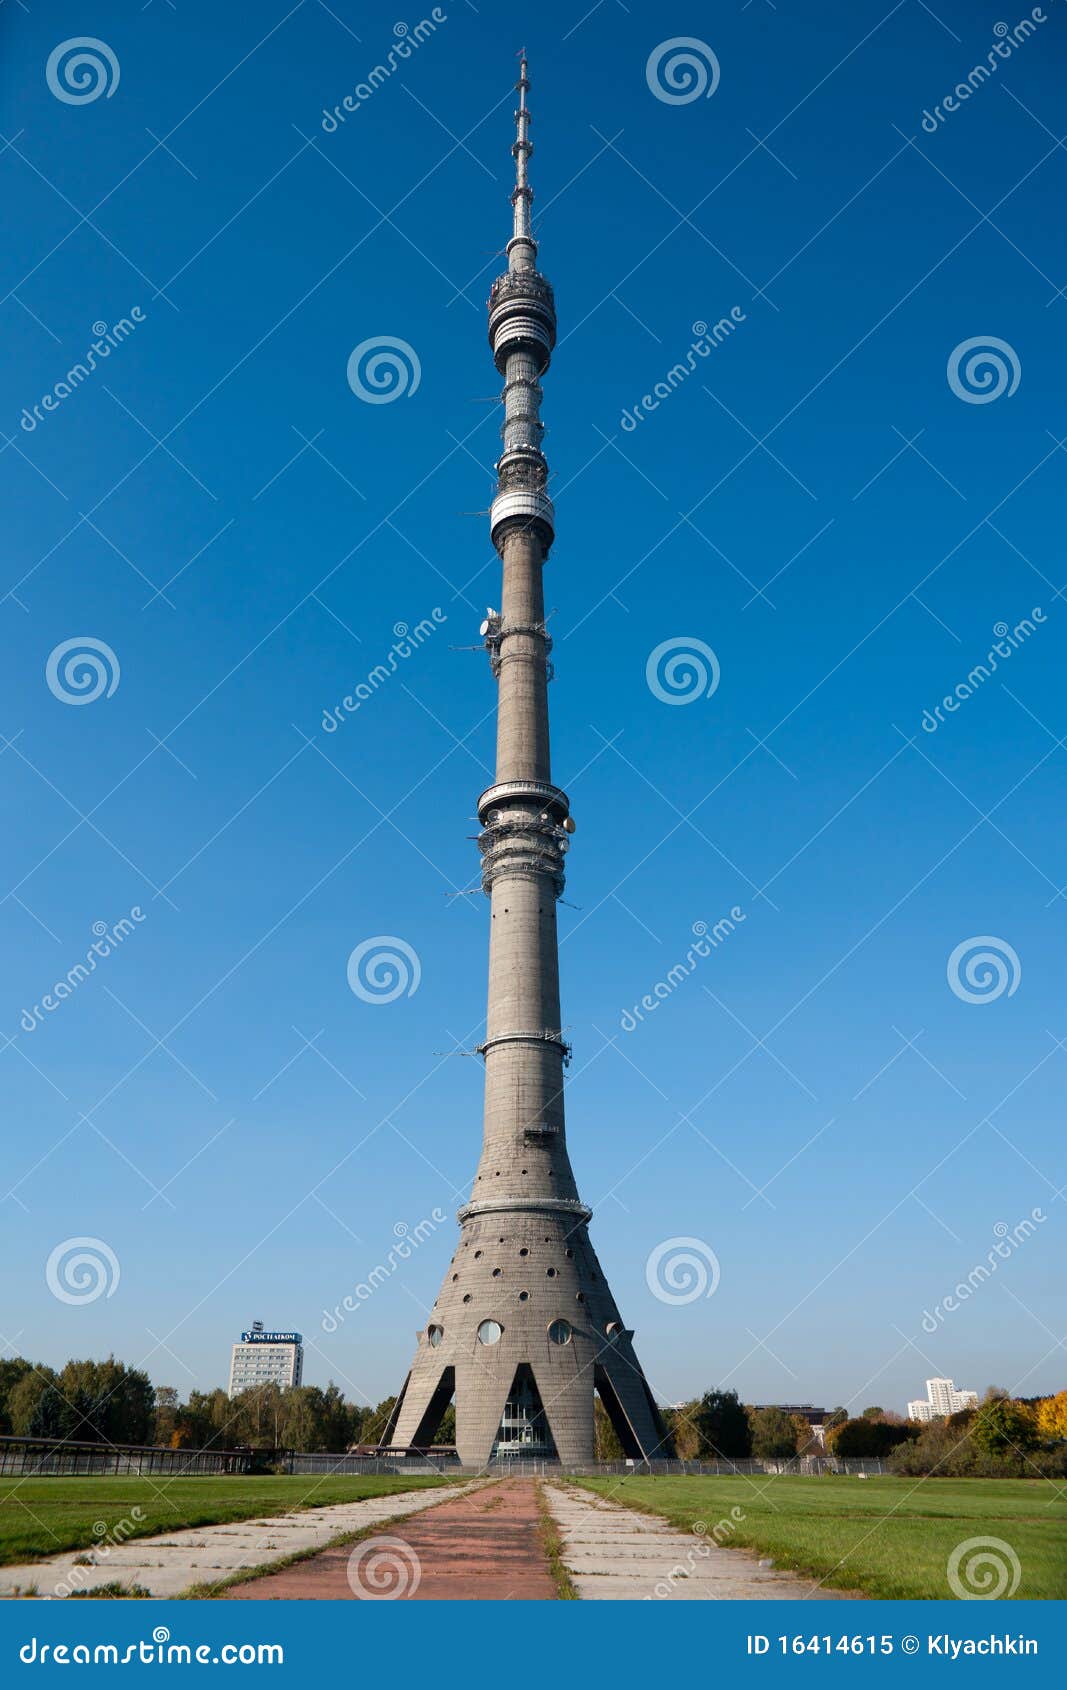 ostankino-television-tower-moscow-16414615.jpg